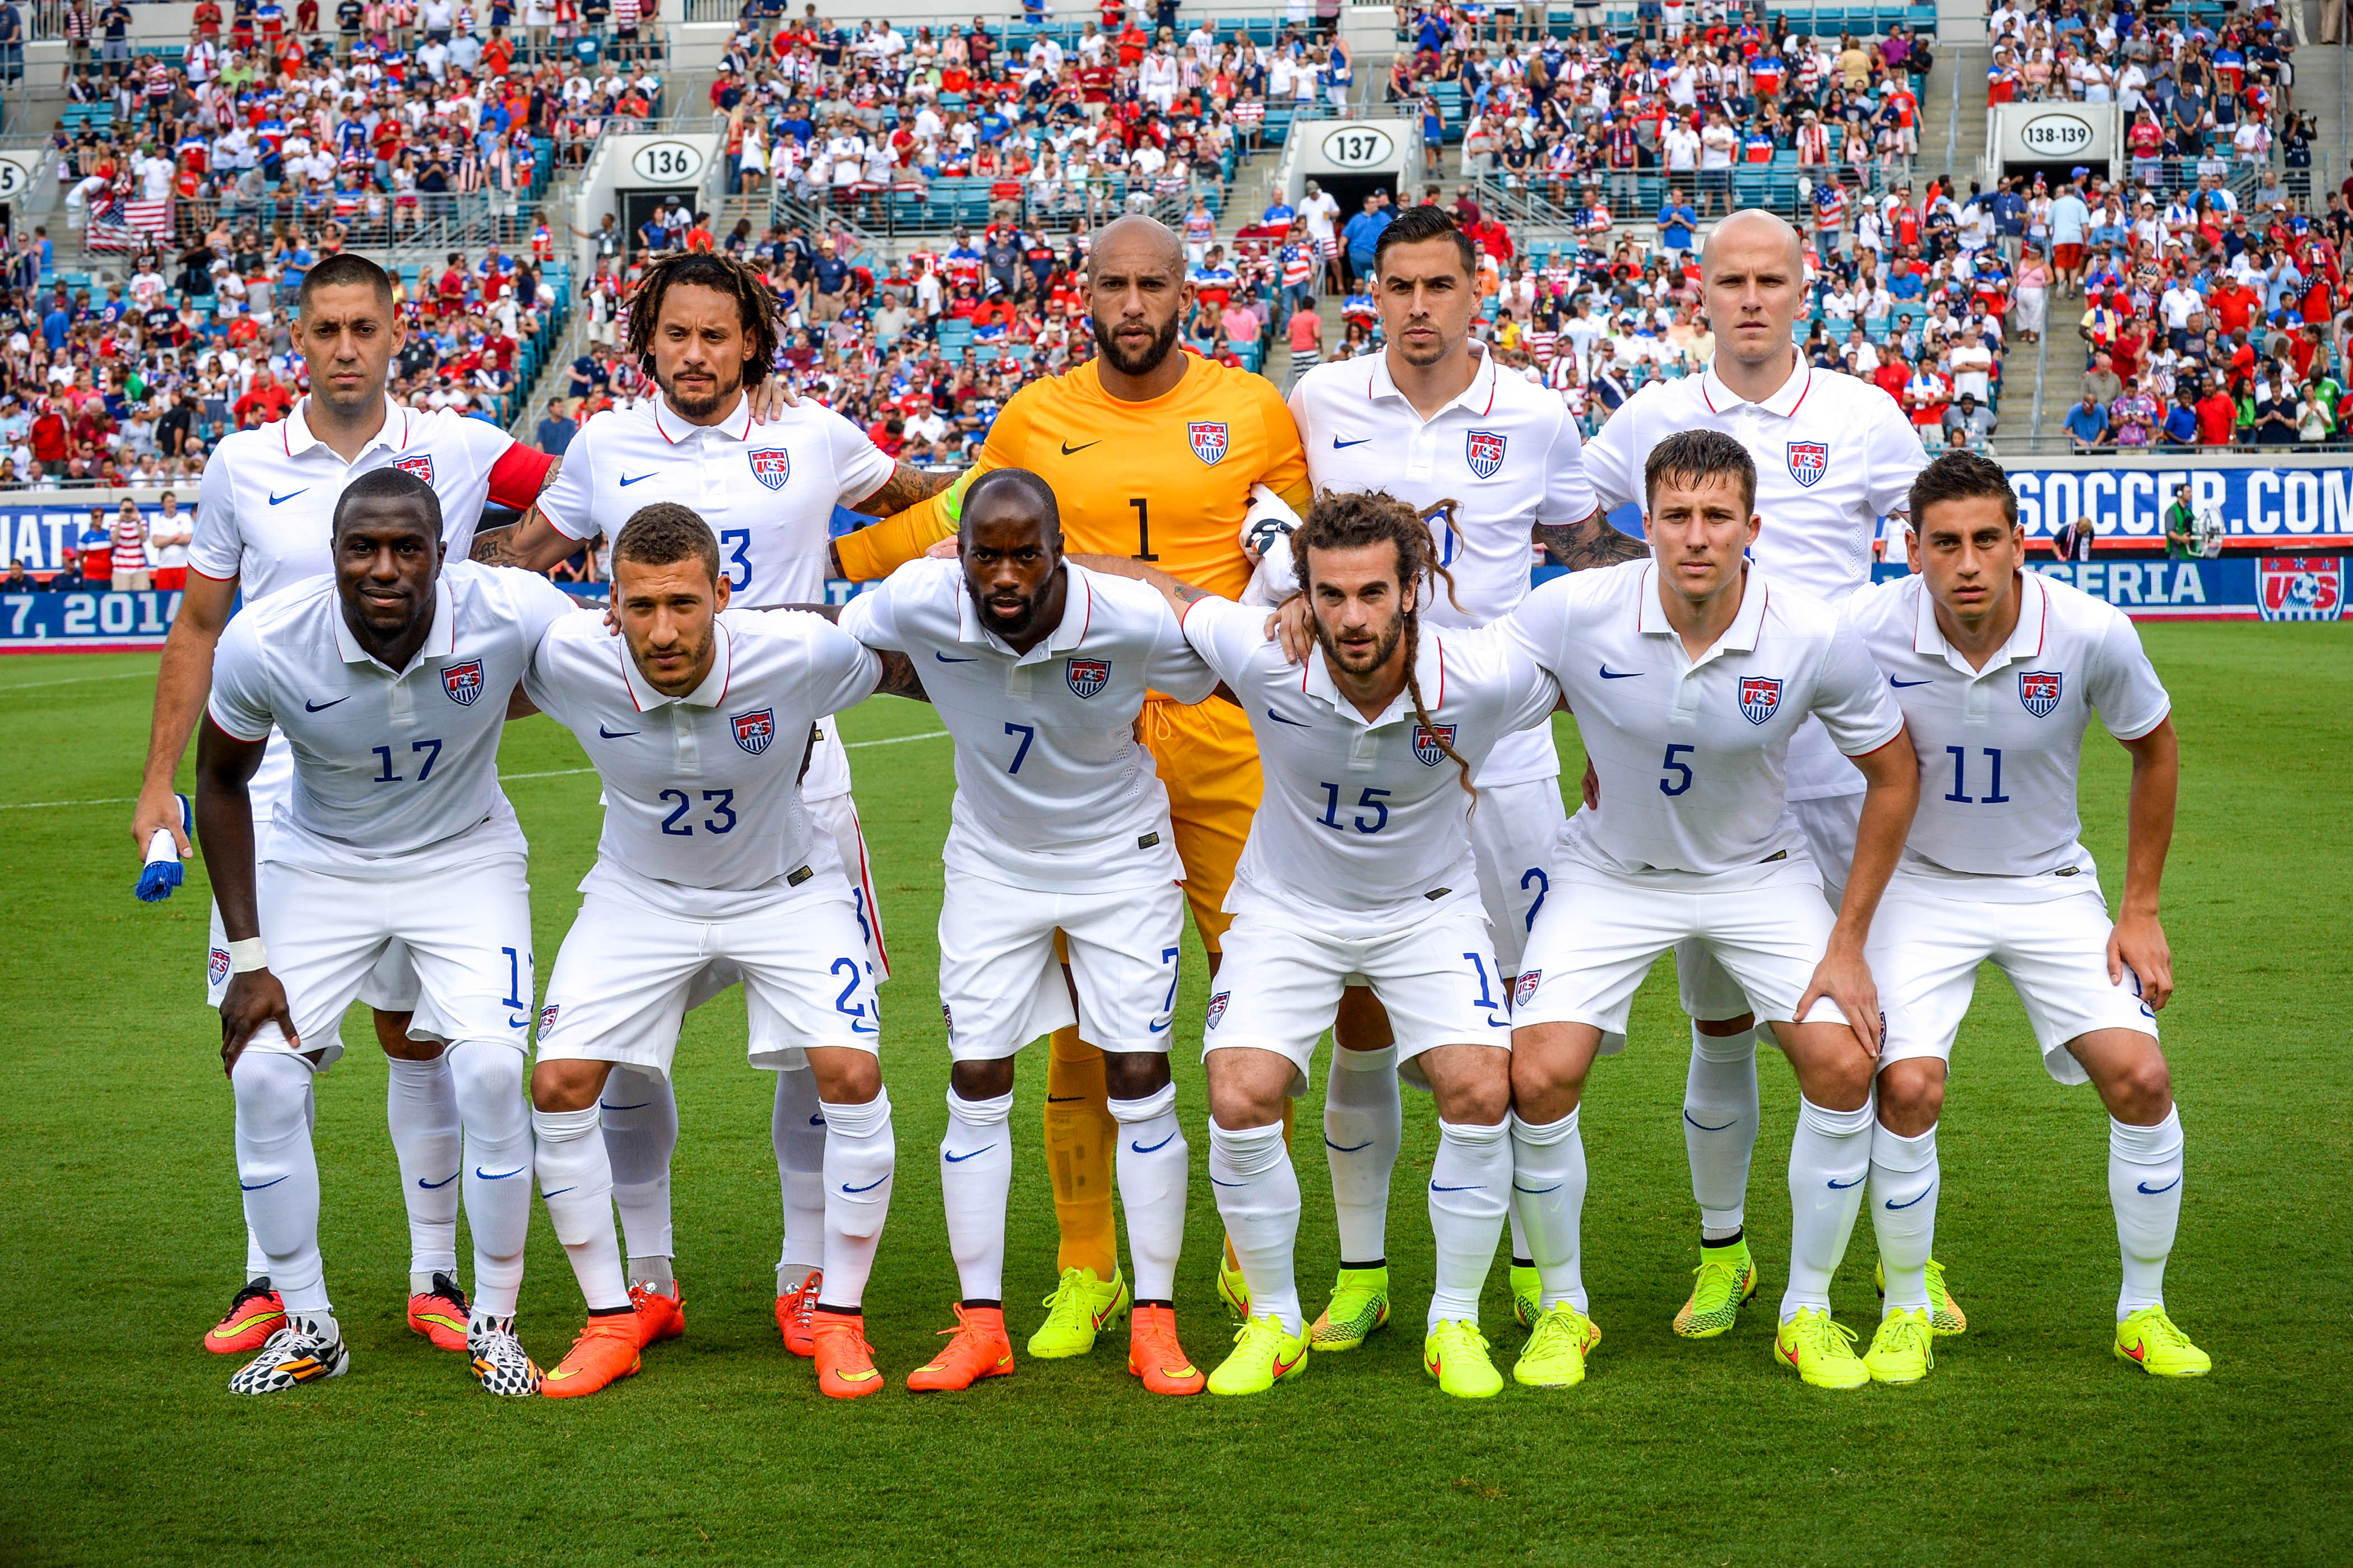 The Us Mens National Soccer Team Poses For A Group Photograph Before The Us Nigerian Soccer